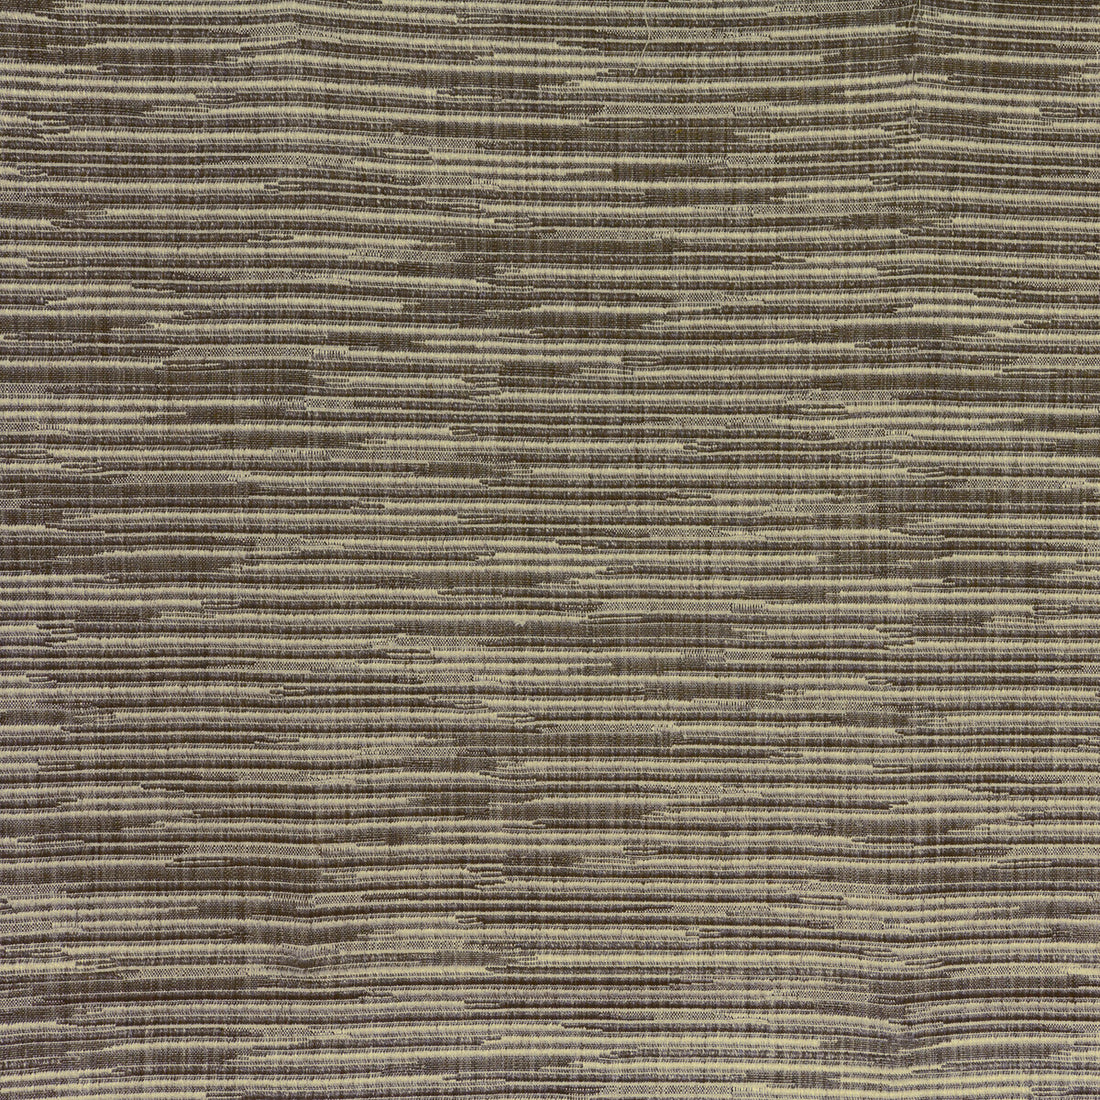 Heliopolis fabric in cedar color - pattern 35857.106.0 - by Kravet Couture in the Windsor Smith Naila collection